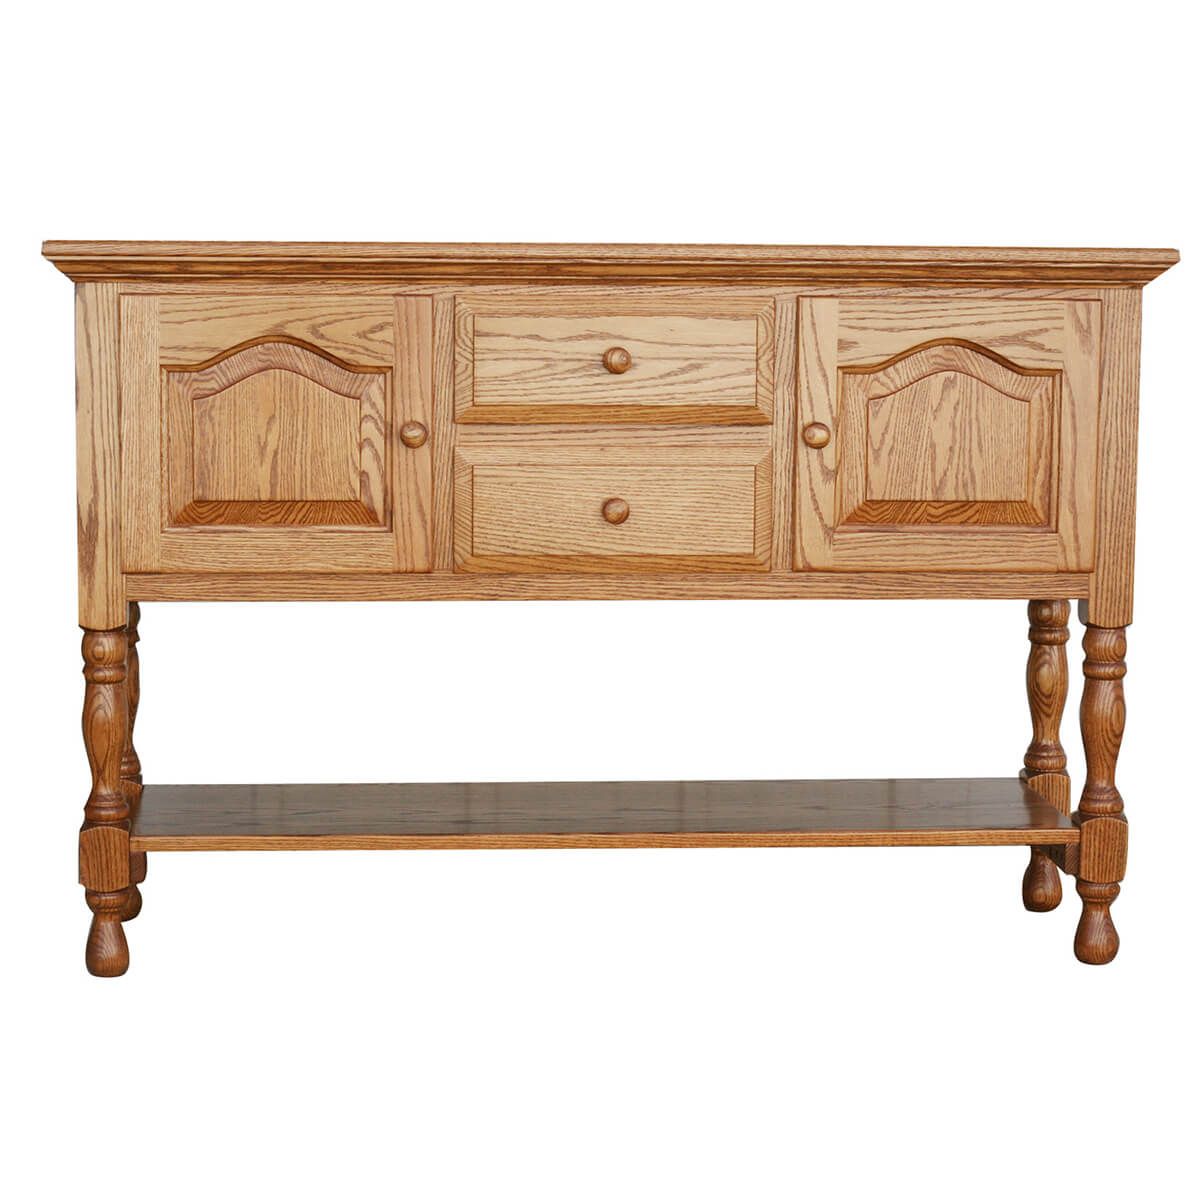 Dining Room Furniture | Amish Elegance – Knoxville Tn In Most Recently Released Knoxville Sideboards (View 19 of 20)